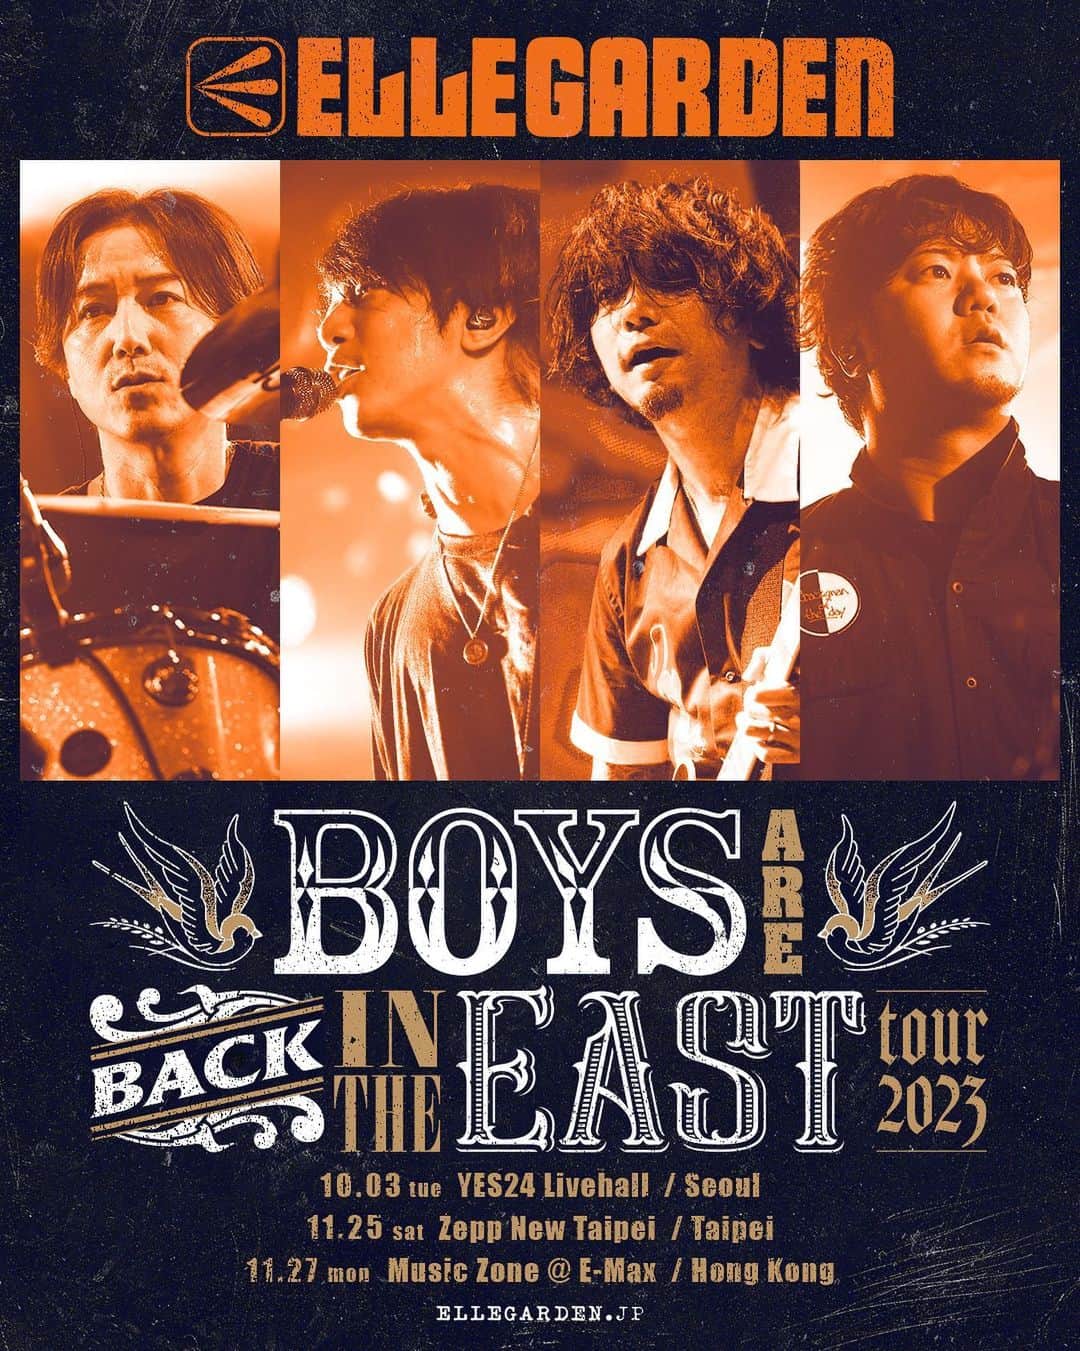 ELLEGARDENのインスタグラム：「⁡ Asia Tour 「Boys are Back in the East Tour 2023」開催決定！ ⁡ ▼公演スケジュール 10/03 (Tue) ソウル YES24 Livehall 11/25 (Sat) 台北 Zepp New Taipei 11/27 (Mon) 香港 Music Zone @ E-Max ⁡ チケット販売スケジュールなど、その他詳細は後日発表いたします。 ⁡ ▼問い合わせ先 ソウル公演：THE VAULT  https://www.instagram.com/thevault.co.kr @thevault.co.kr   ⁡ 台北公演：大鴻藝術 BIGART https://www.facebook.com/bigart.tw @bigart.staff   ⁡ 香港公演：Clockenflap https://www.instagram.com/clockenflap/ @clockenflap   ⁡ ーーーーーーーーーーーーーーーーーーーー ⁡ Asia Tour "Boys are Back in the East Tour 2023" Confirmed!! ⁡ ▼Schedule 10/03 (Tue) Seoul - YES24 Livehall 11/25 (Sat) Taipei - Zepp New Taipei 11/27 (Mon) Hong Kong - Music Zone @ E-Max ⁡ Look out for ticketing details coming soon. ⁡ ▼Info Seoul：THE VAULT https://www.instagram.com/thevault.co.kr @thevault.co.kr  　 Taipei：大鴻藝術 BIGART https://www.facebook.com/bigart.tw @bigart.staff  　 Hong Kong：Clockenflap https://www.instagram.com/clockenflap/ @clockenflap   #ELLEGARDEN  #BoysareBackintheEastTour2023」